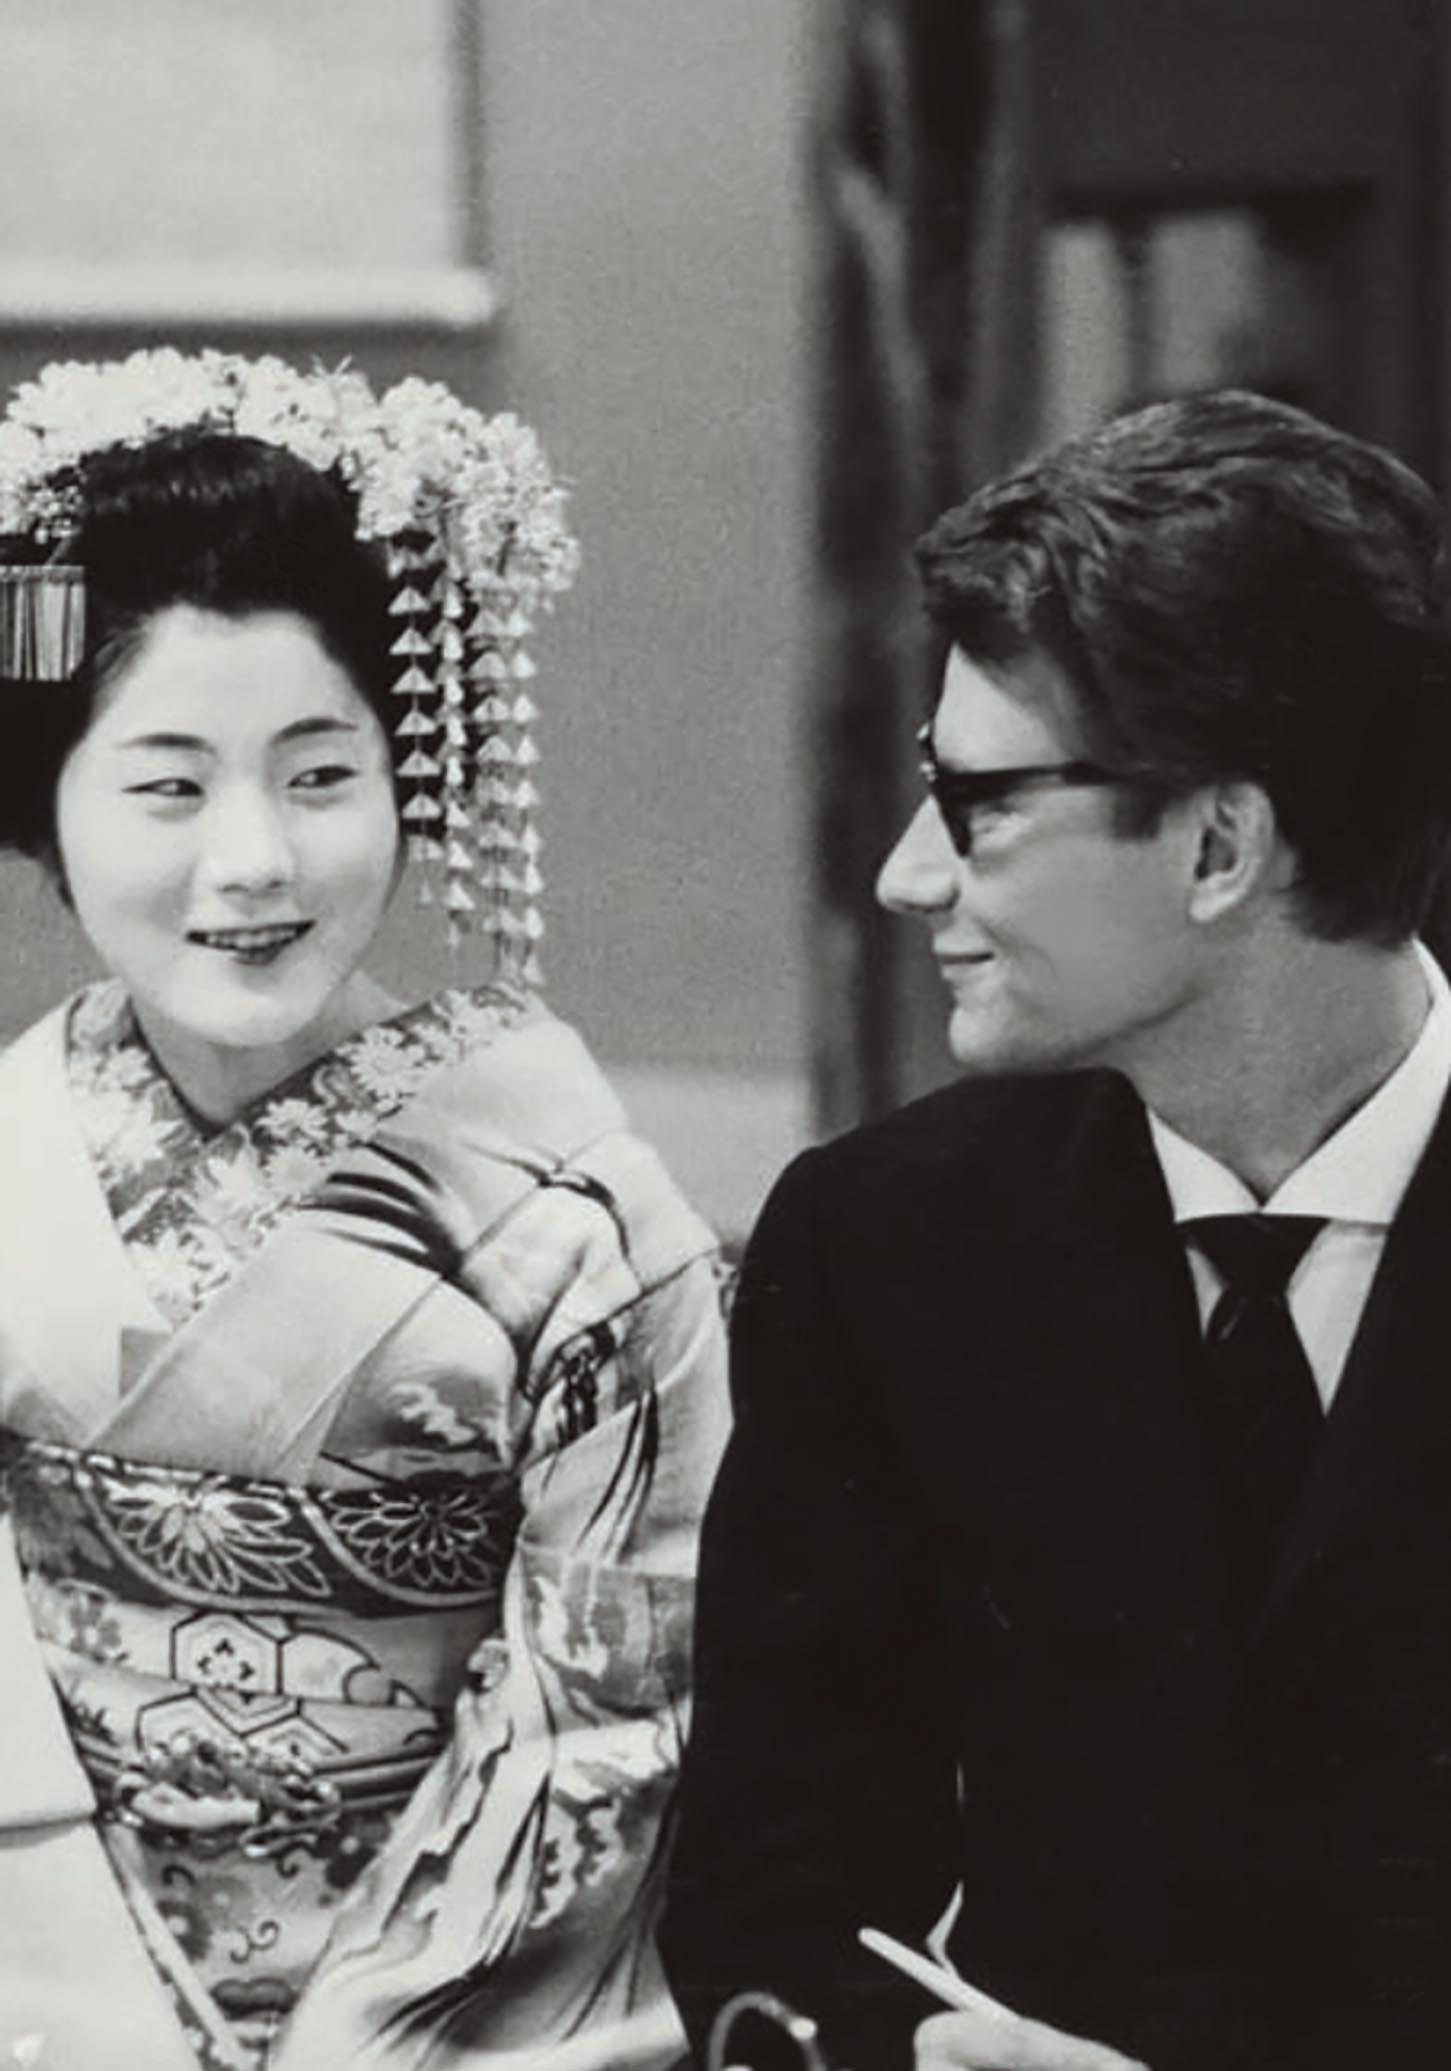 Yves Saint Laurent and a courtesan wearing traditional garments during the designer’s first trip to Kyoto, Japan in April 1963